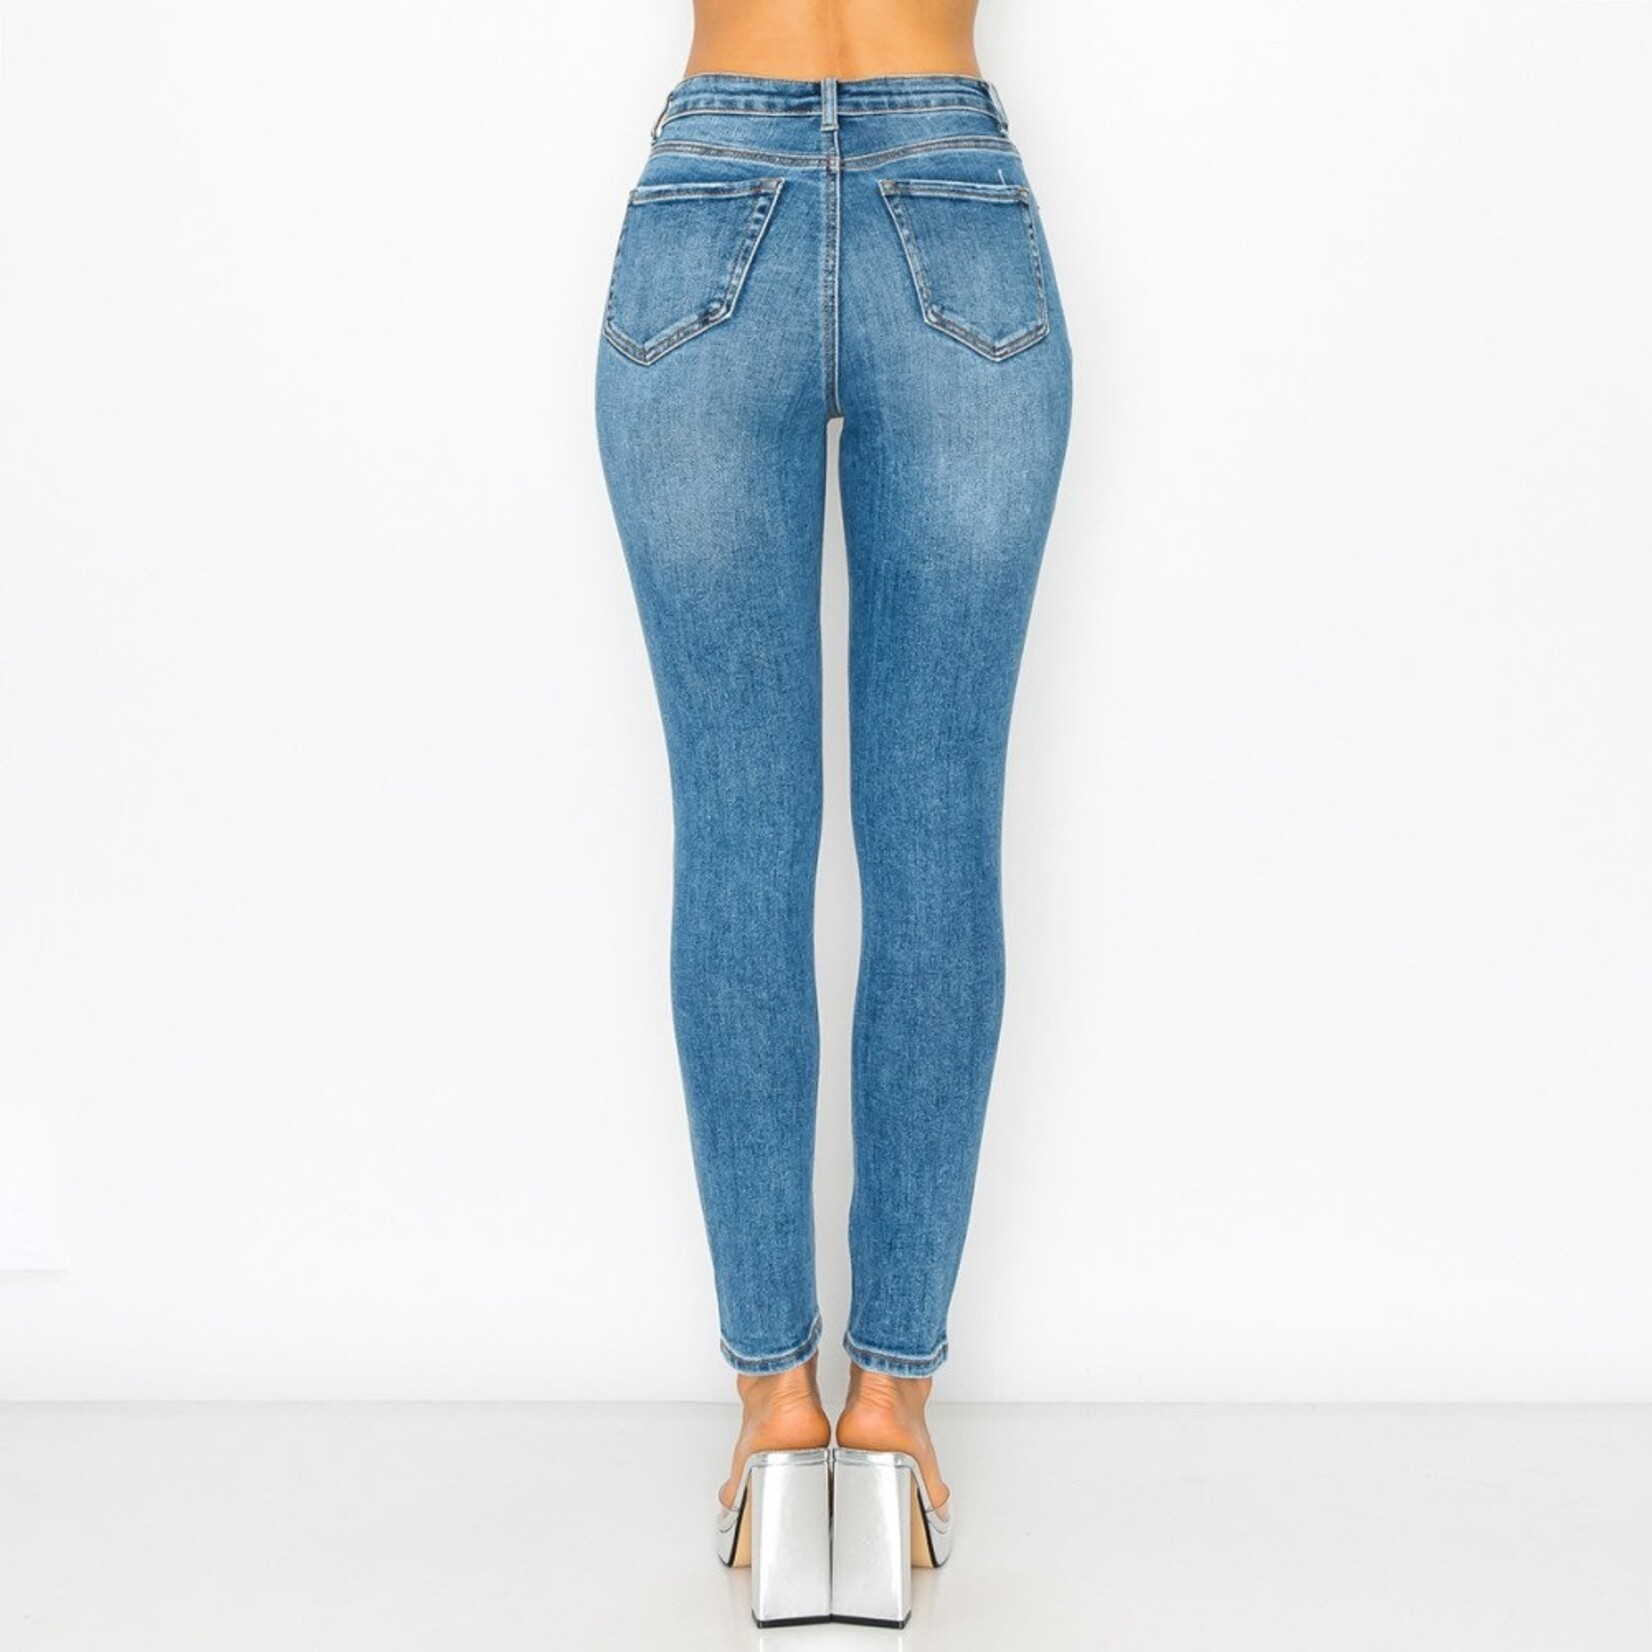 Wax Jeans Wax Jeans - Authentic High Waisted Basic Skinny - 90284